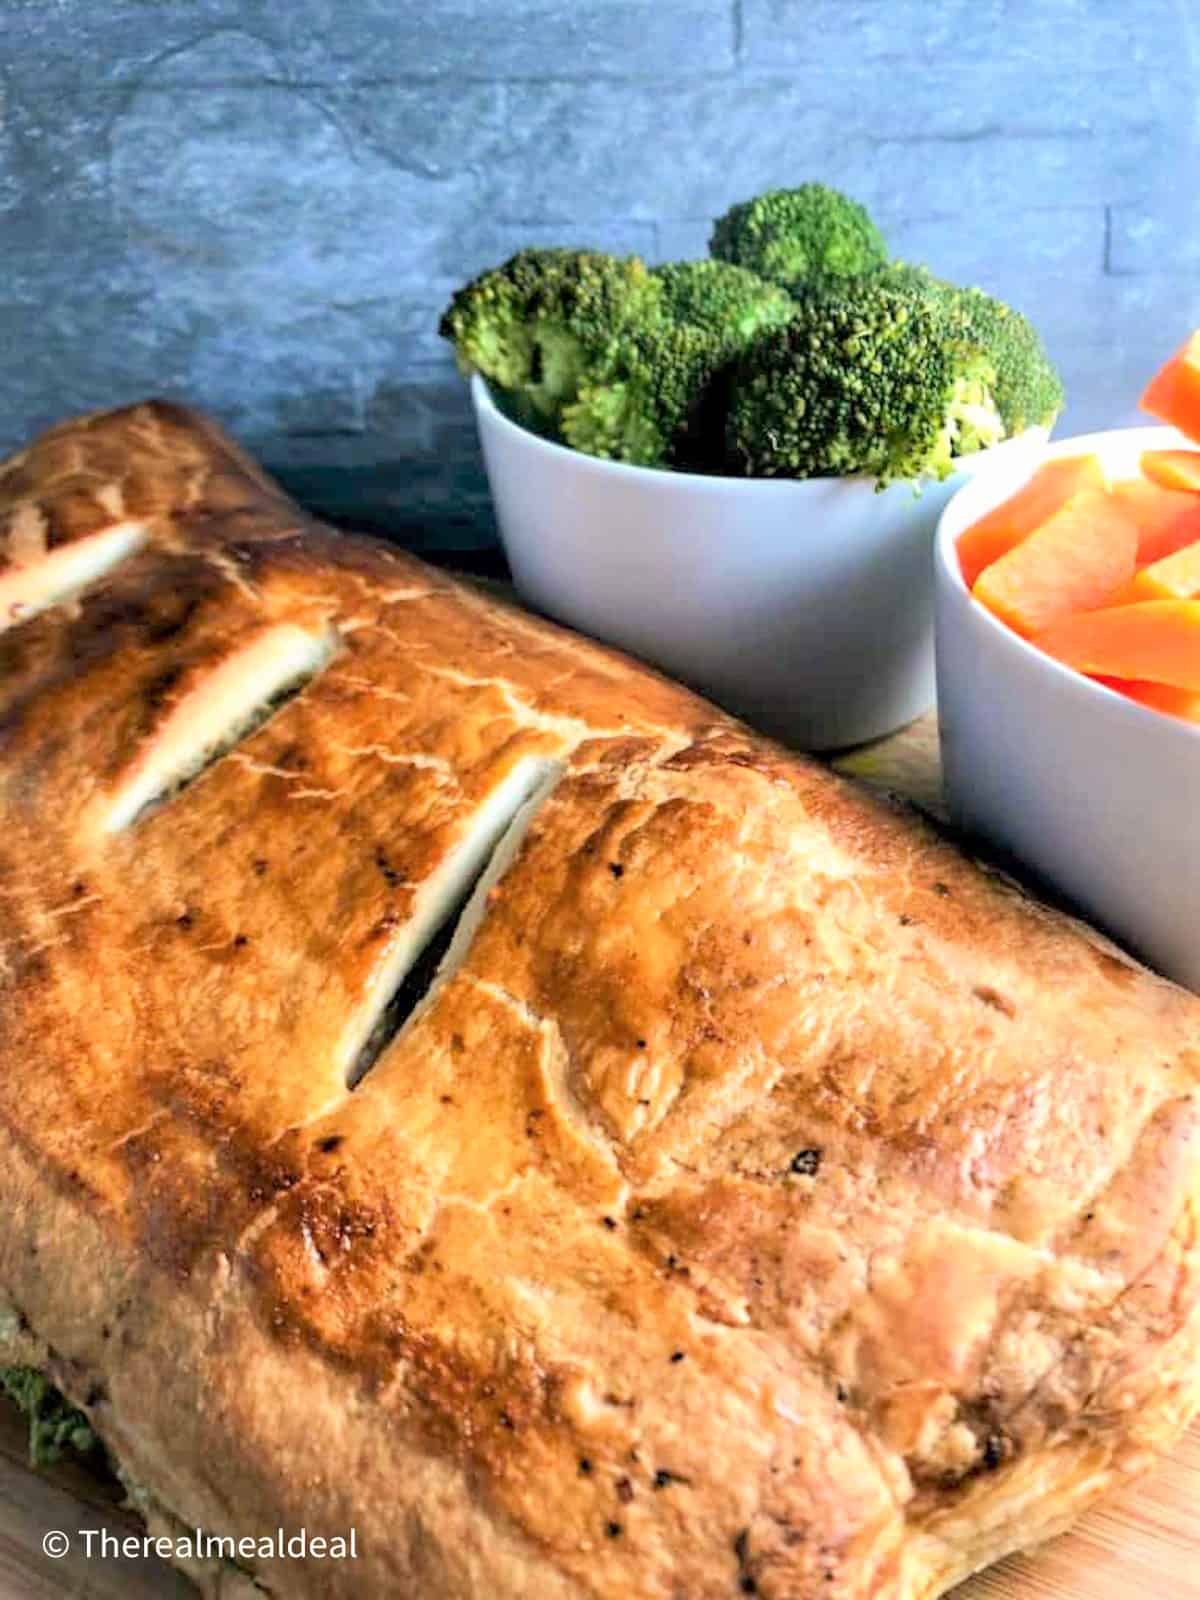 salmon en croute large parcel cooked with broccoli and carrots side dish